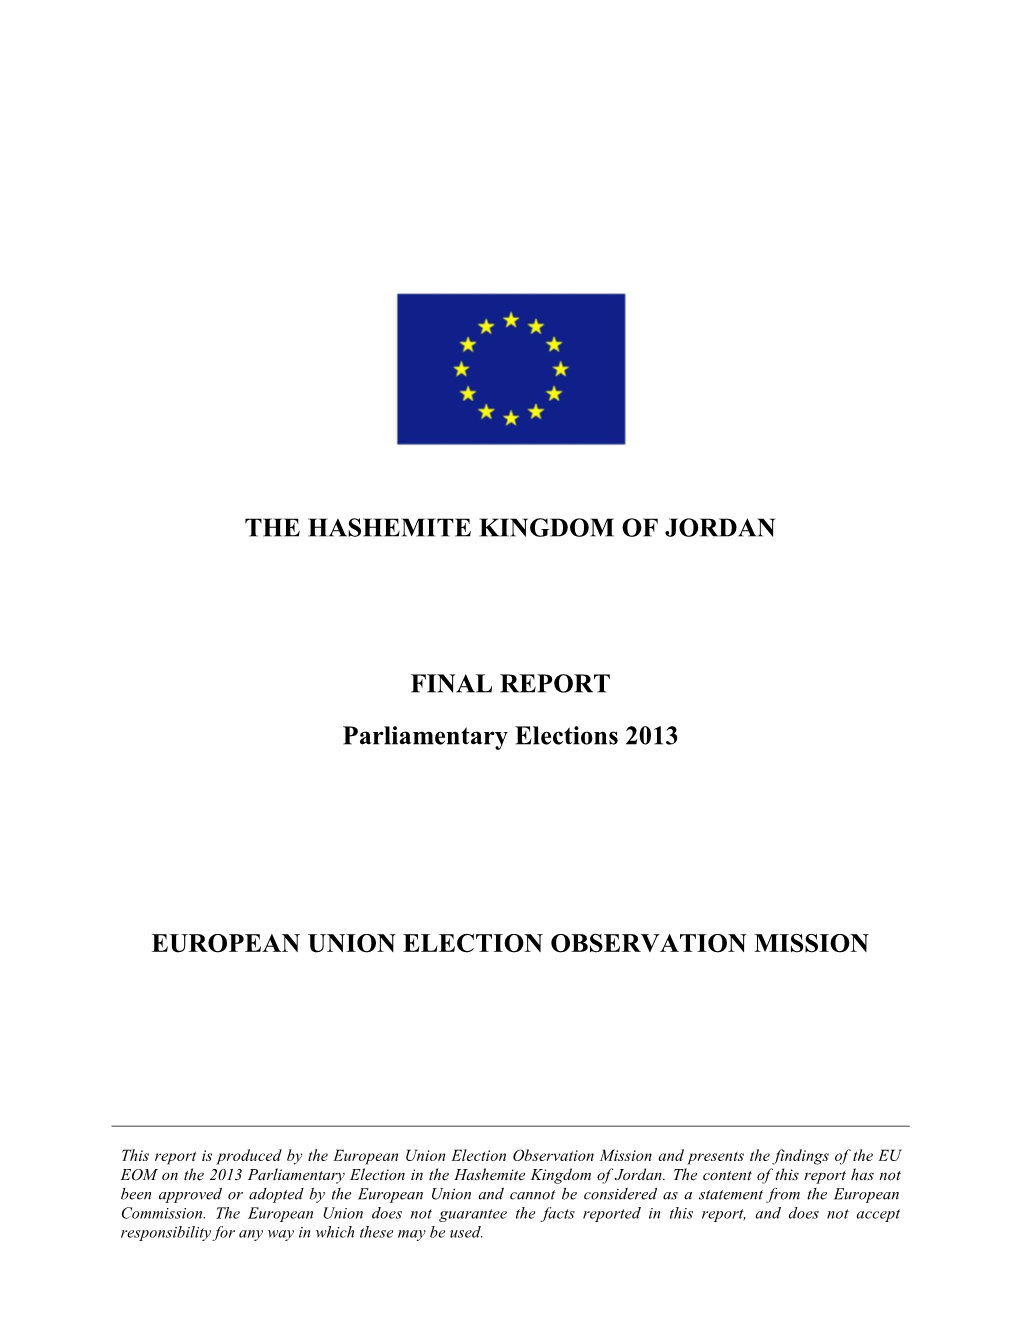 THE HASHEMITE KINGDOM of JORDAN FINAL REPORT Parliamentary Elections 2013 EUROPEAN UNION ELECTION OBSERVATION MISSION